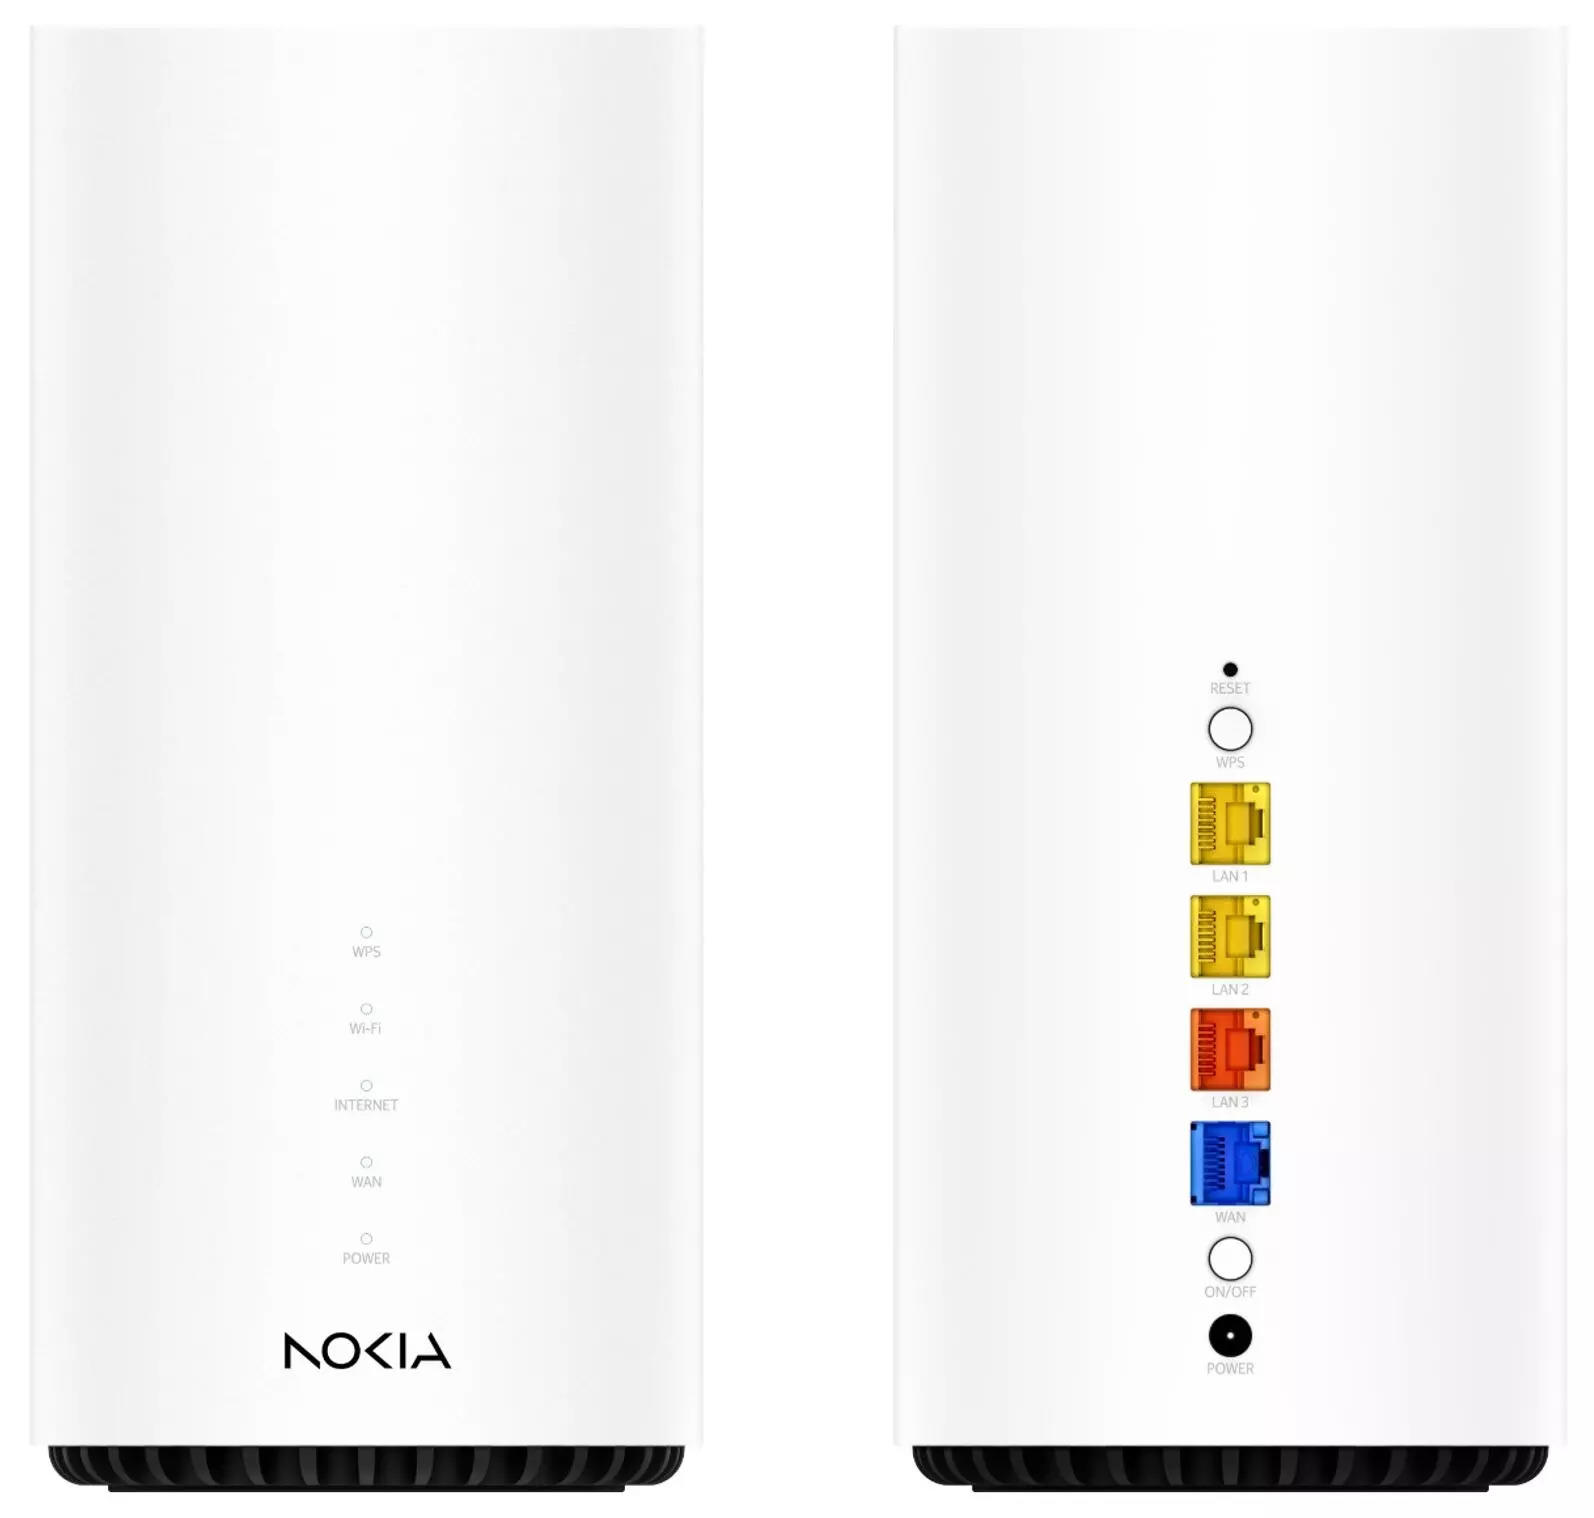 Nokia launches Wi-Fi 6E gateway for homes, offices